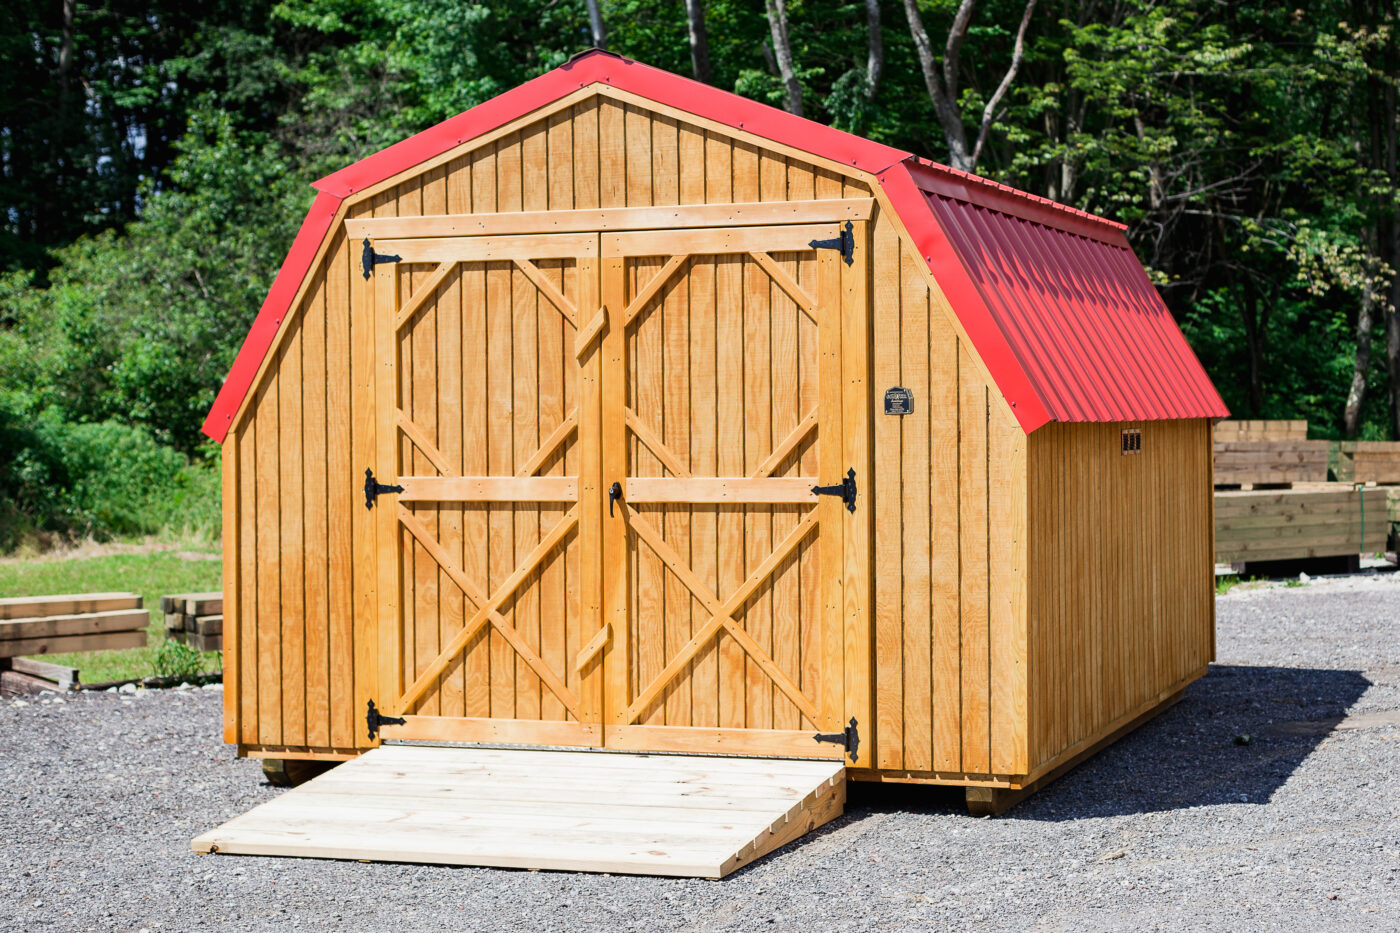 How long should a shed roof last